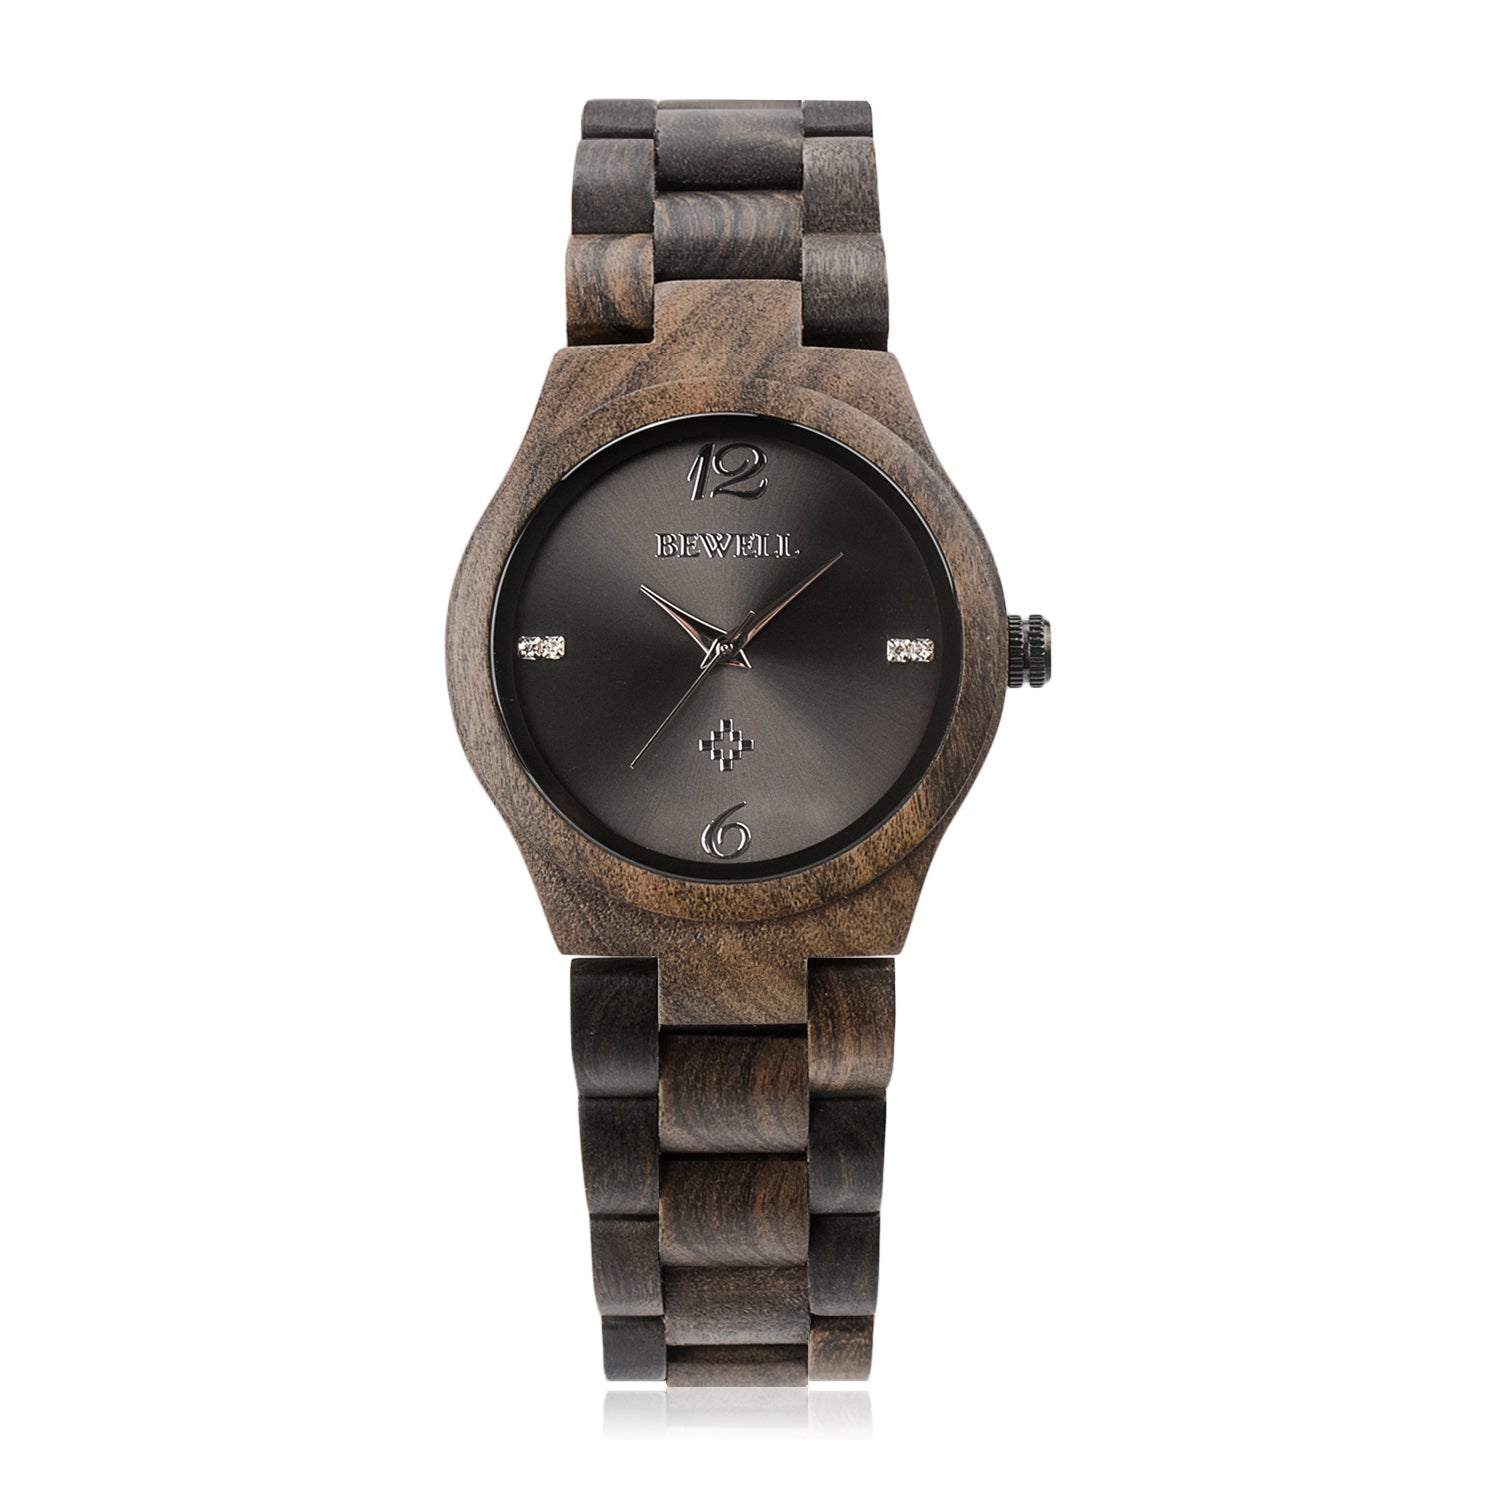 BEWELL ZS - W153A Female Wooden Watch Swirl Marks Dial